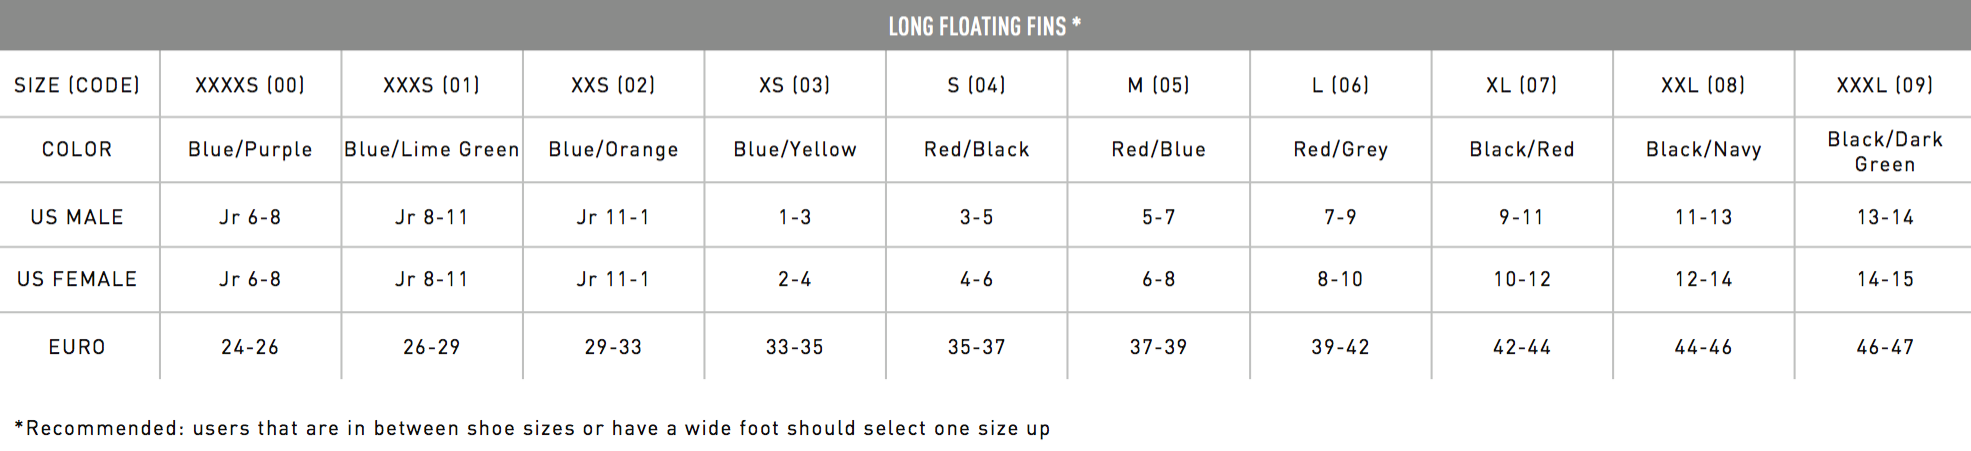 Tyr Fins Size Chart